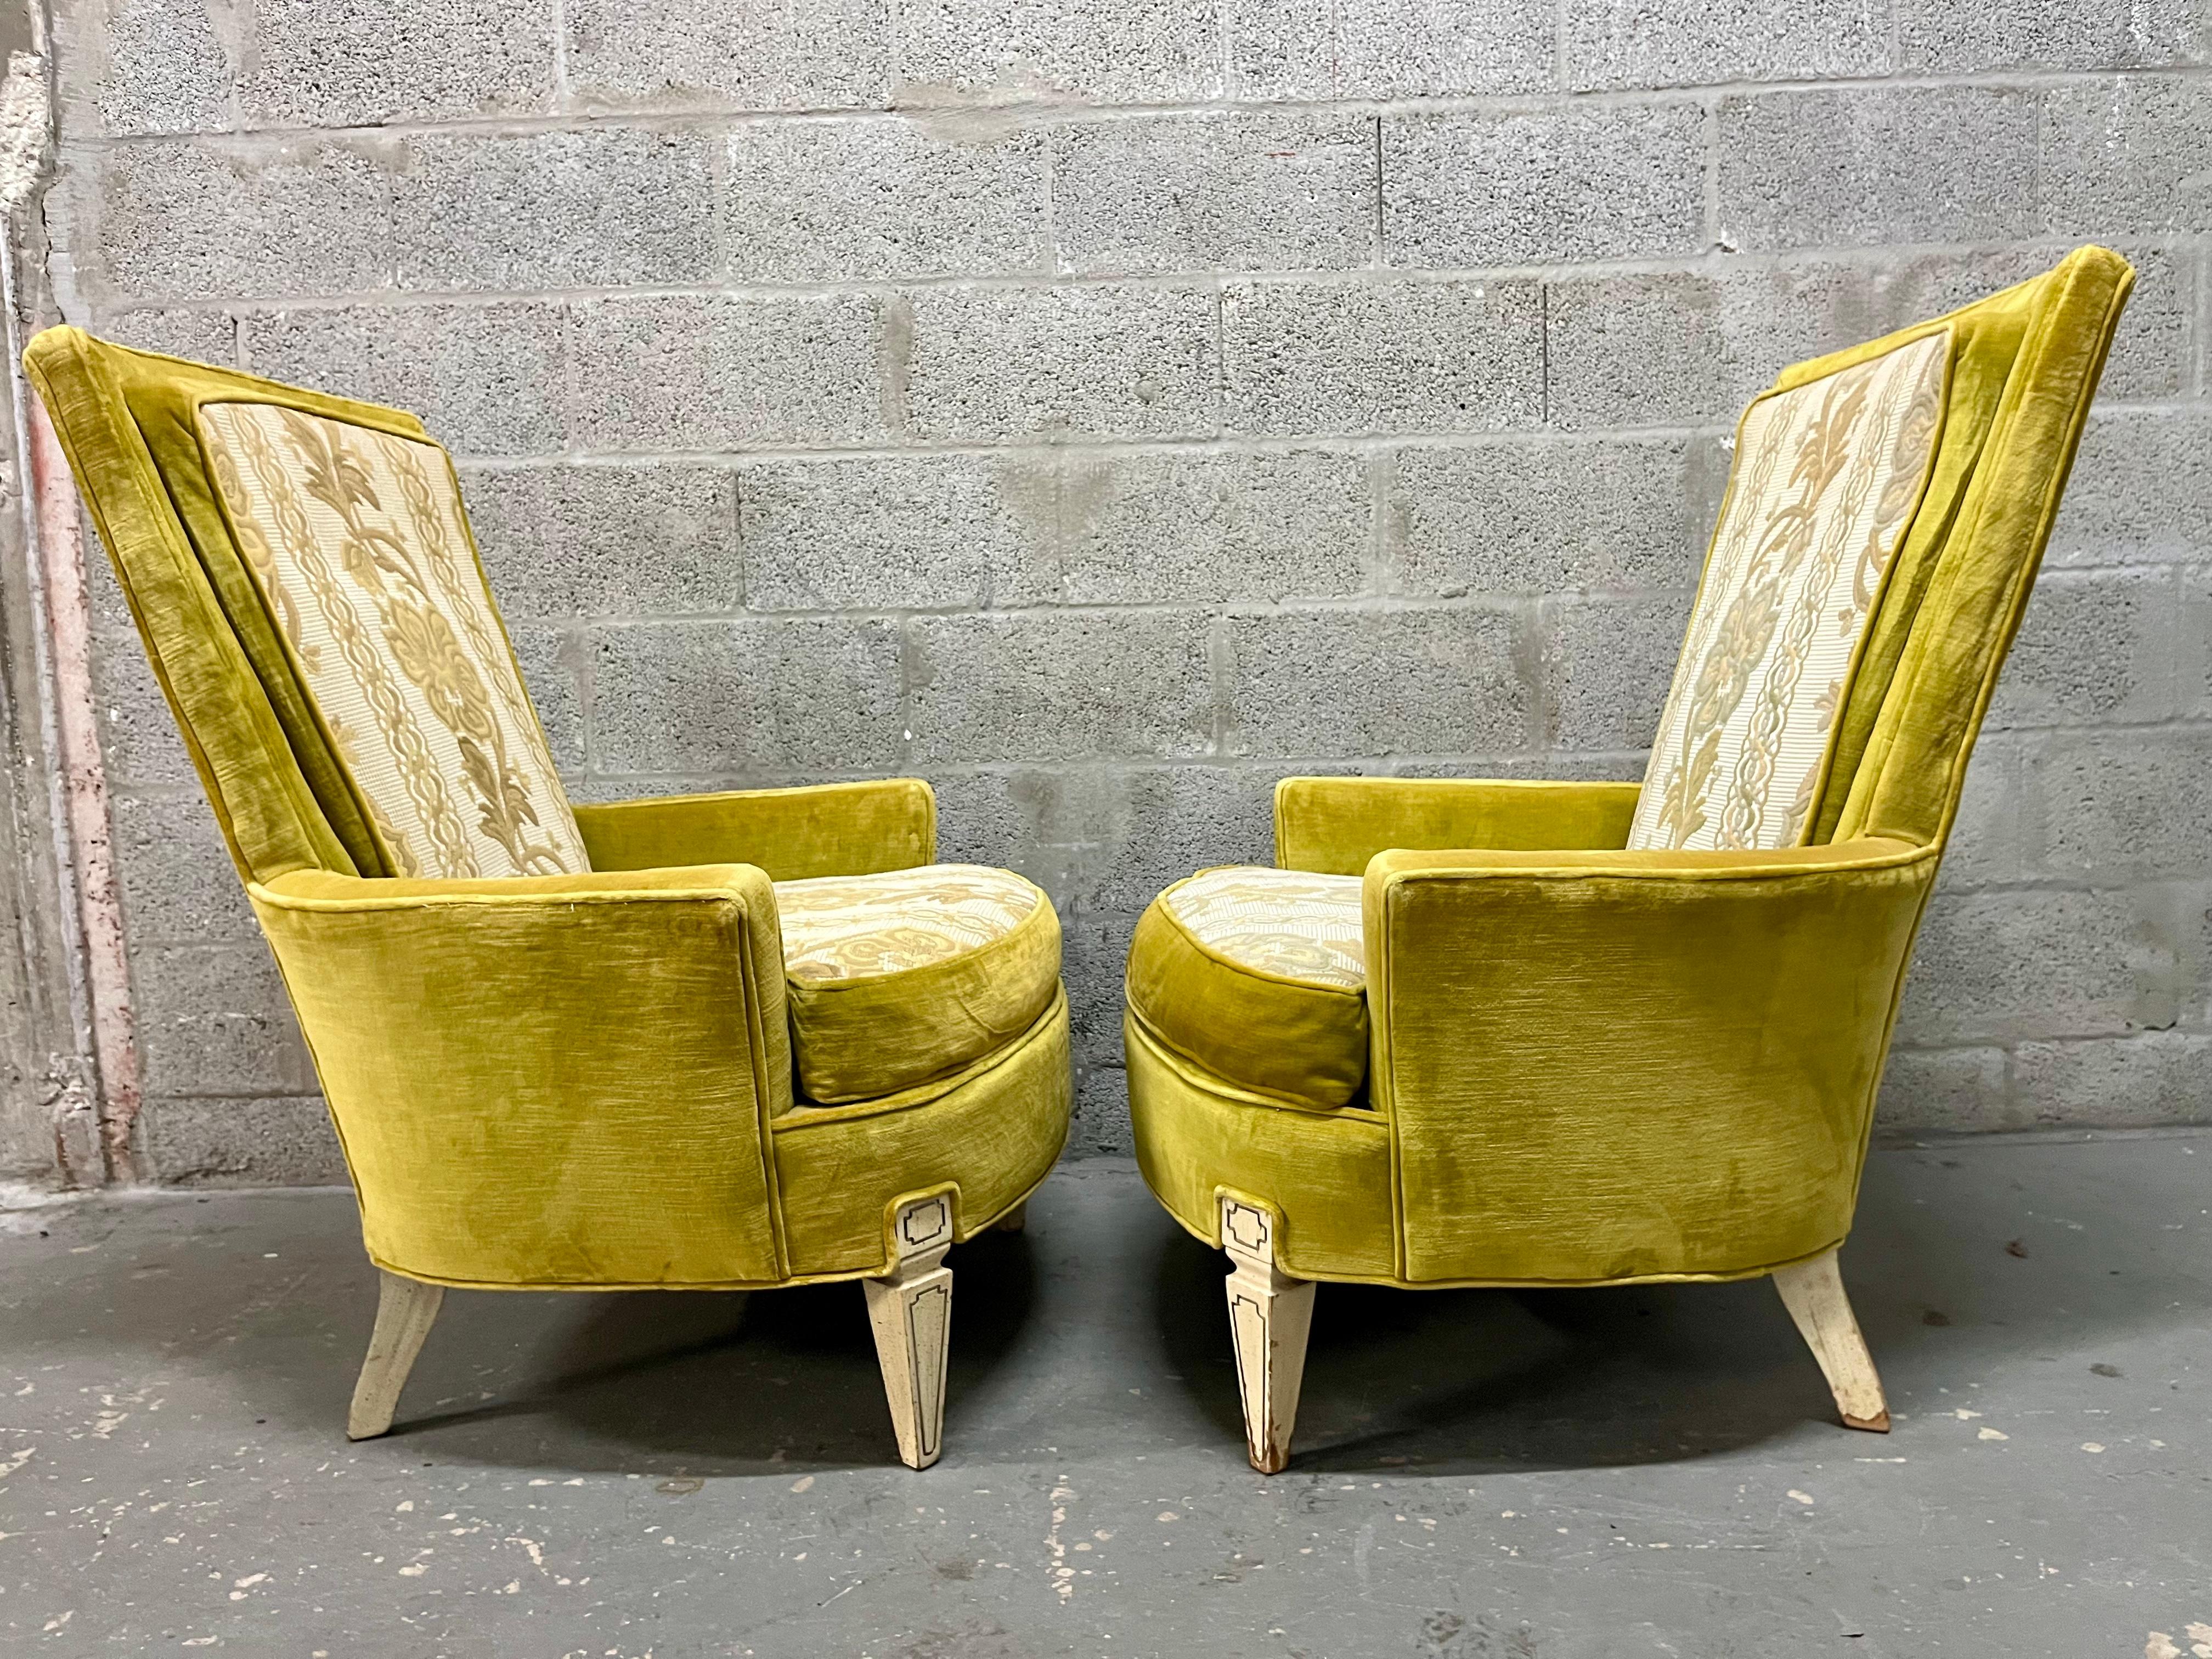 A Pair of Hollywood Regency Upholstered Lounge Chairs by Silver Craft. C. 1960s For Sale 3